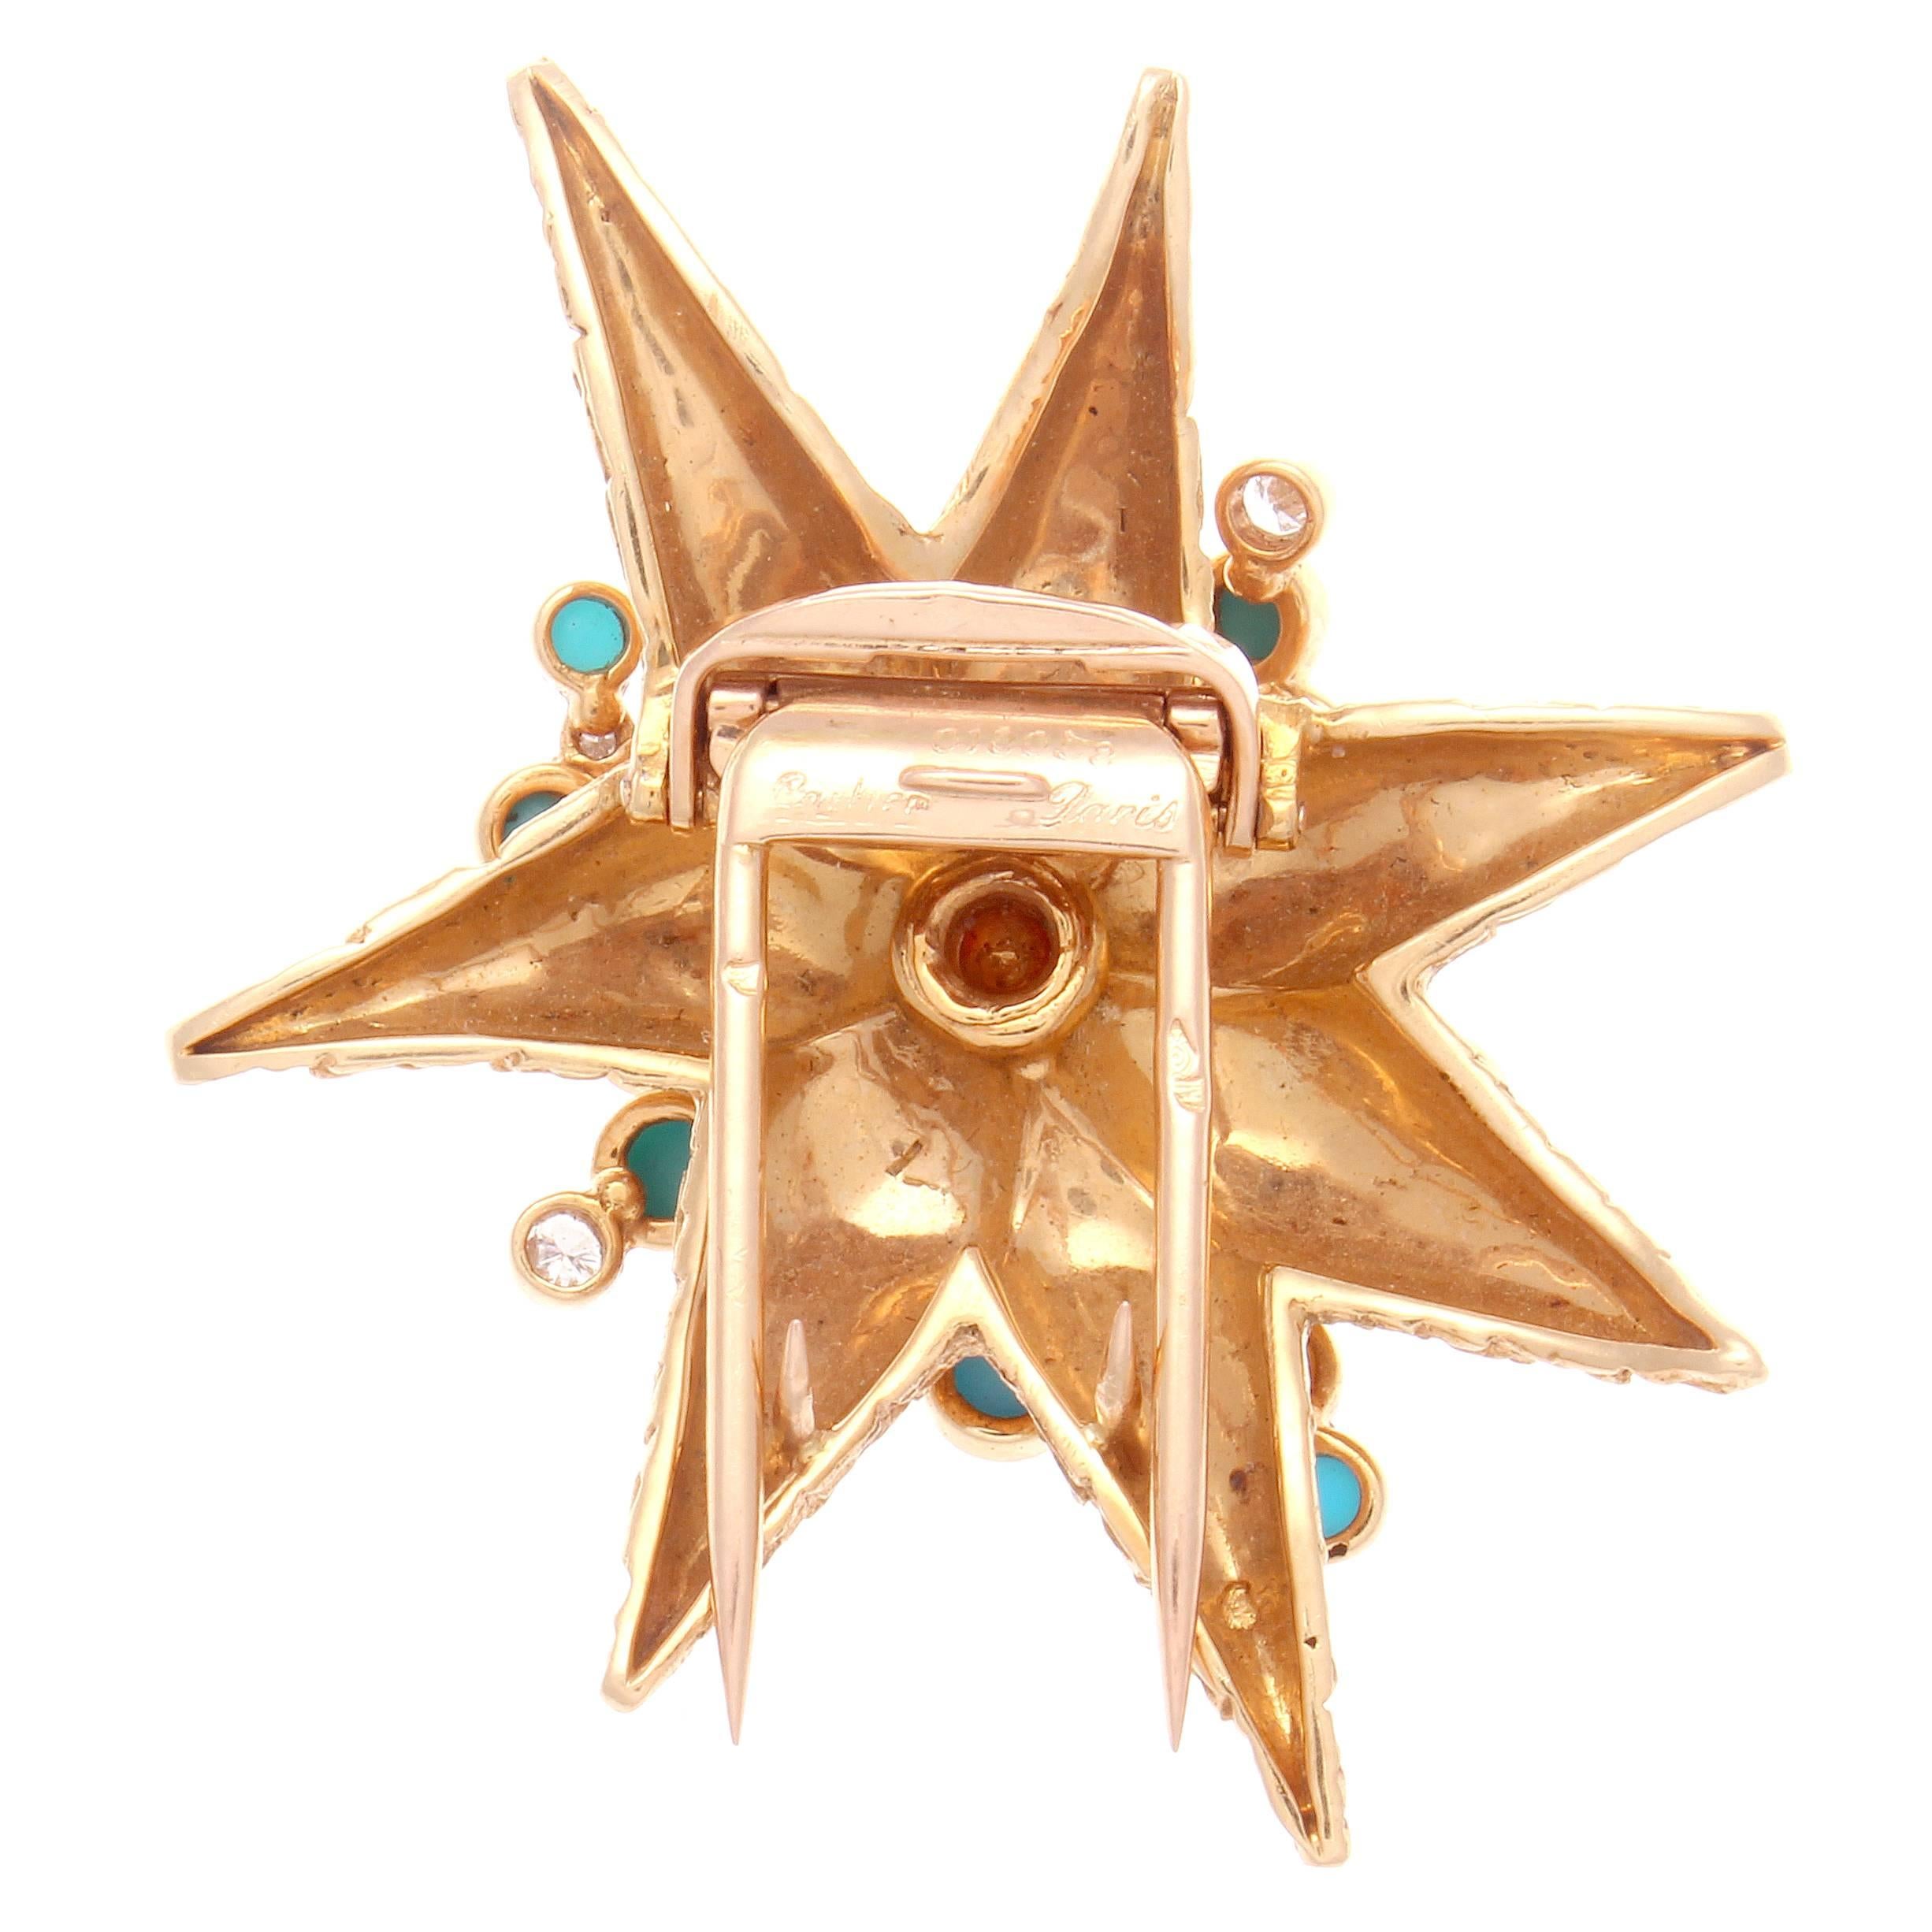 The asymmetrical starfish design features fine Persian turquoise cabochons and clean white round diamonds. The 18k gold is expertly textured to represent the starfish. Signed Cartier Paris and numbered.

1-3/4 inches x 1-1/2 inches